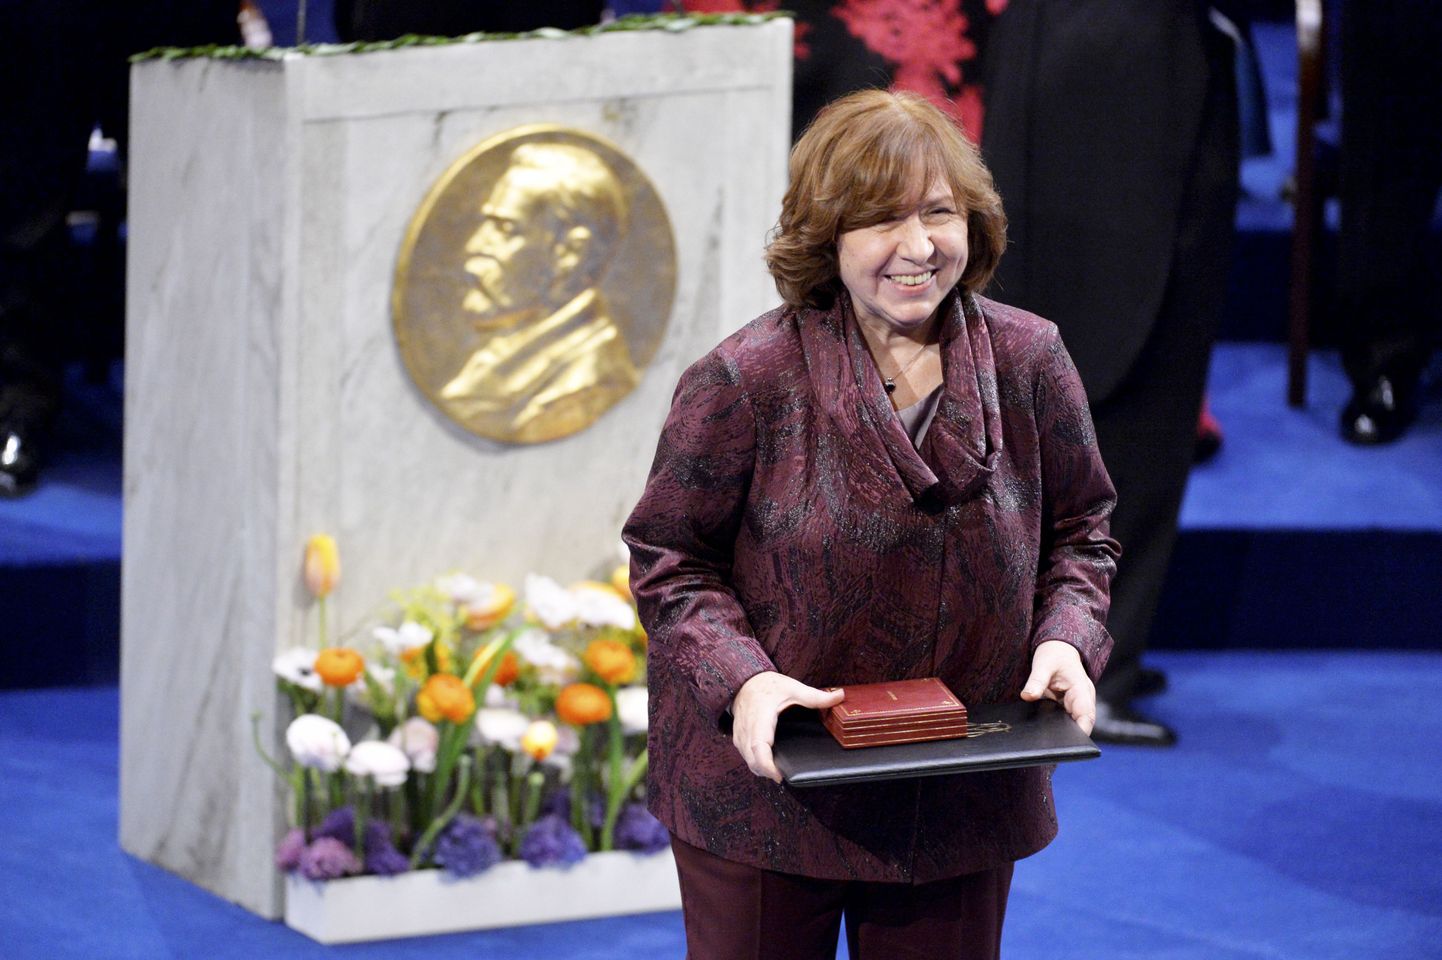 2015 Nobel literature laureate Svetlana Alexievich of Belarus poses with the award during the 2015 Nobel prize award ceremony in Stockholm Concert Hall December 10, 2015.REUTERS/Marcus Ericsson/TT News Agency    ATTENTION EDITORS - THIS IMAGE WAS PROVIDED BY A THIRD PARTY. FOR EDITORIAL USE ONLY. NOT FOR SALE FOR MARKETING OR ADVERTISING CAMPAIGNS. THIS PICTURE IS DISTRIBUTED EXACTLY AS RECEIVED BY REUTERS, AS A SERVICE TO CLIENTS. SWEDEN OUT. NO COMMERCIAL OR EDITORIAL SALES IN SWEDEN. NO COMMERCIAL SALES.      TPX IMAGES OF THE DAY